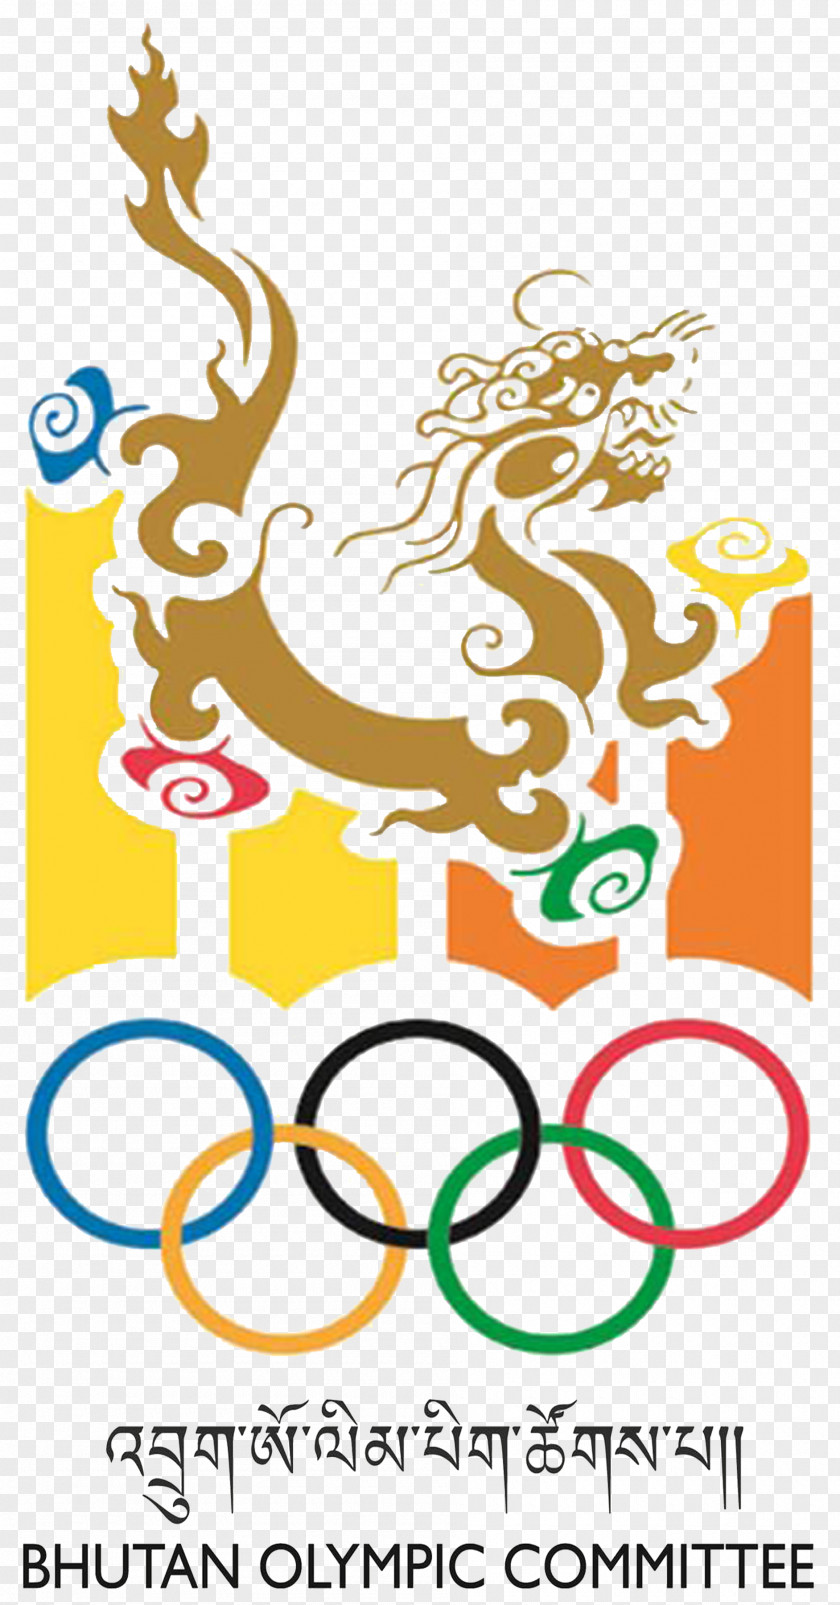 National Paralympic Committee Olympic Games Bhutan International Festival 2018 Winter Olympics 1998 PNG